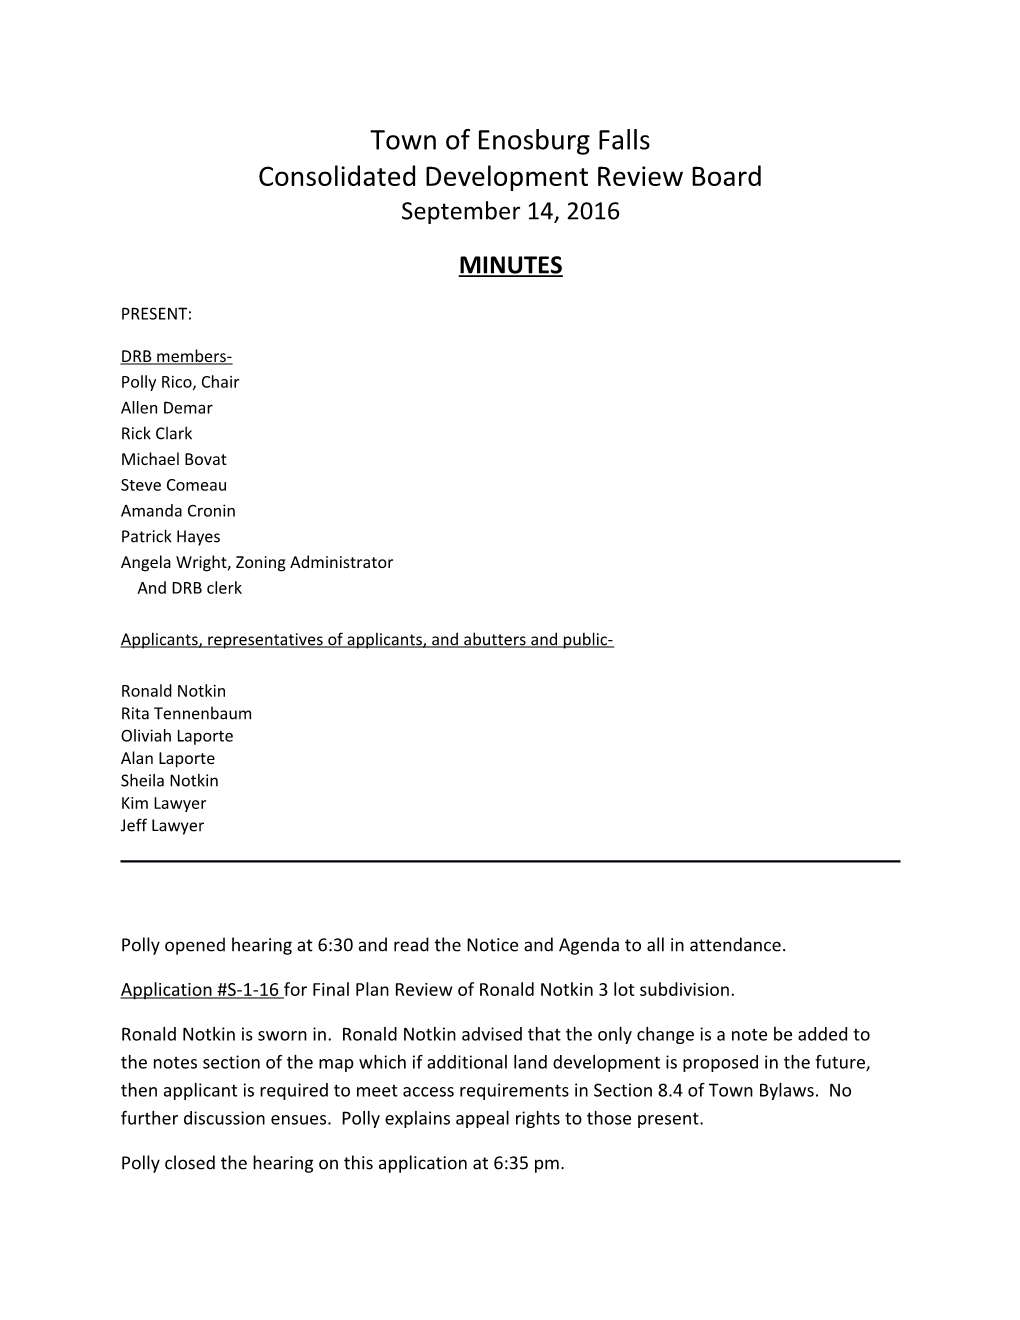 Consolidated Development Review Board